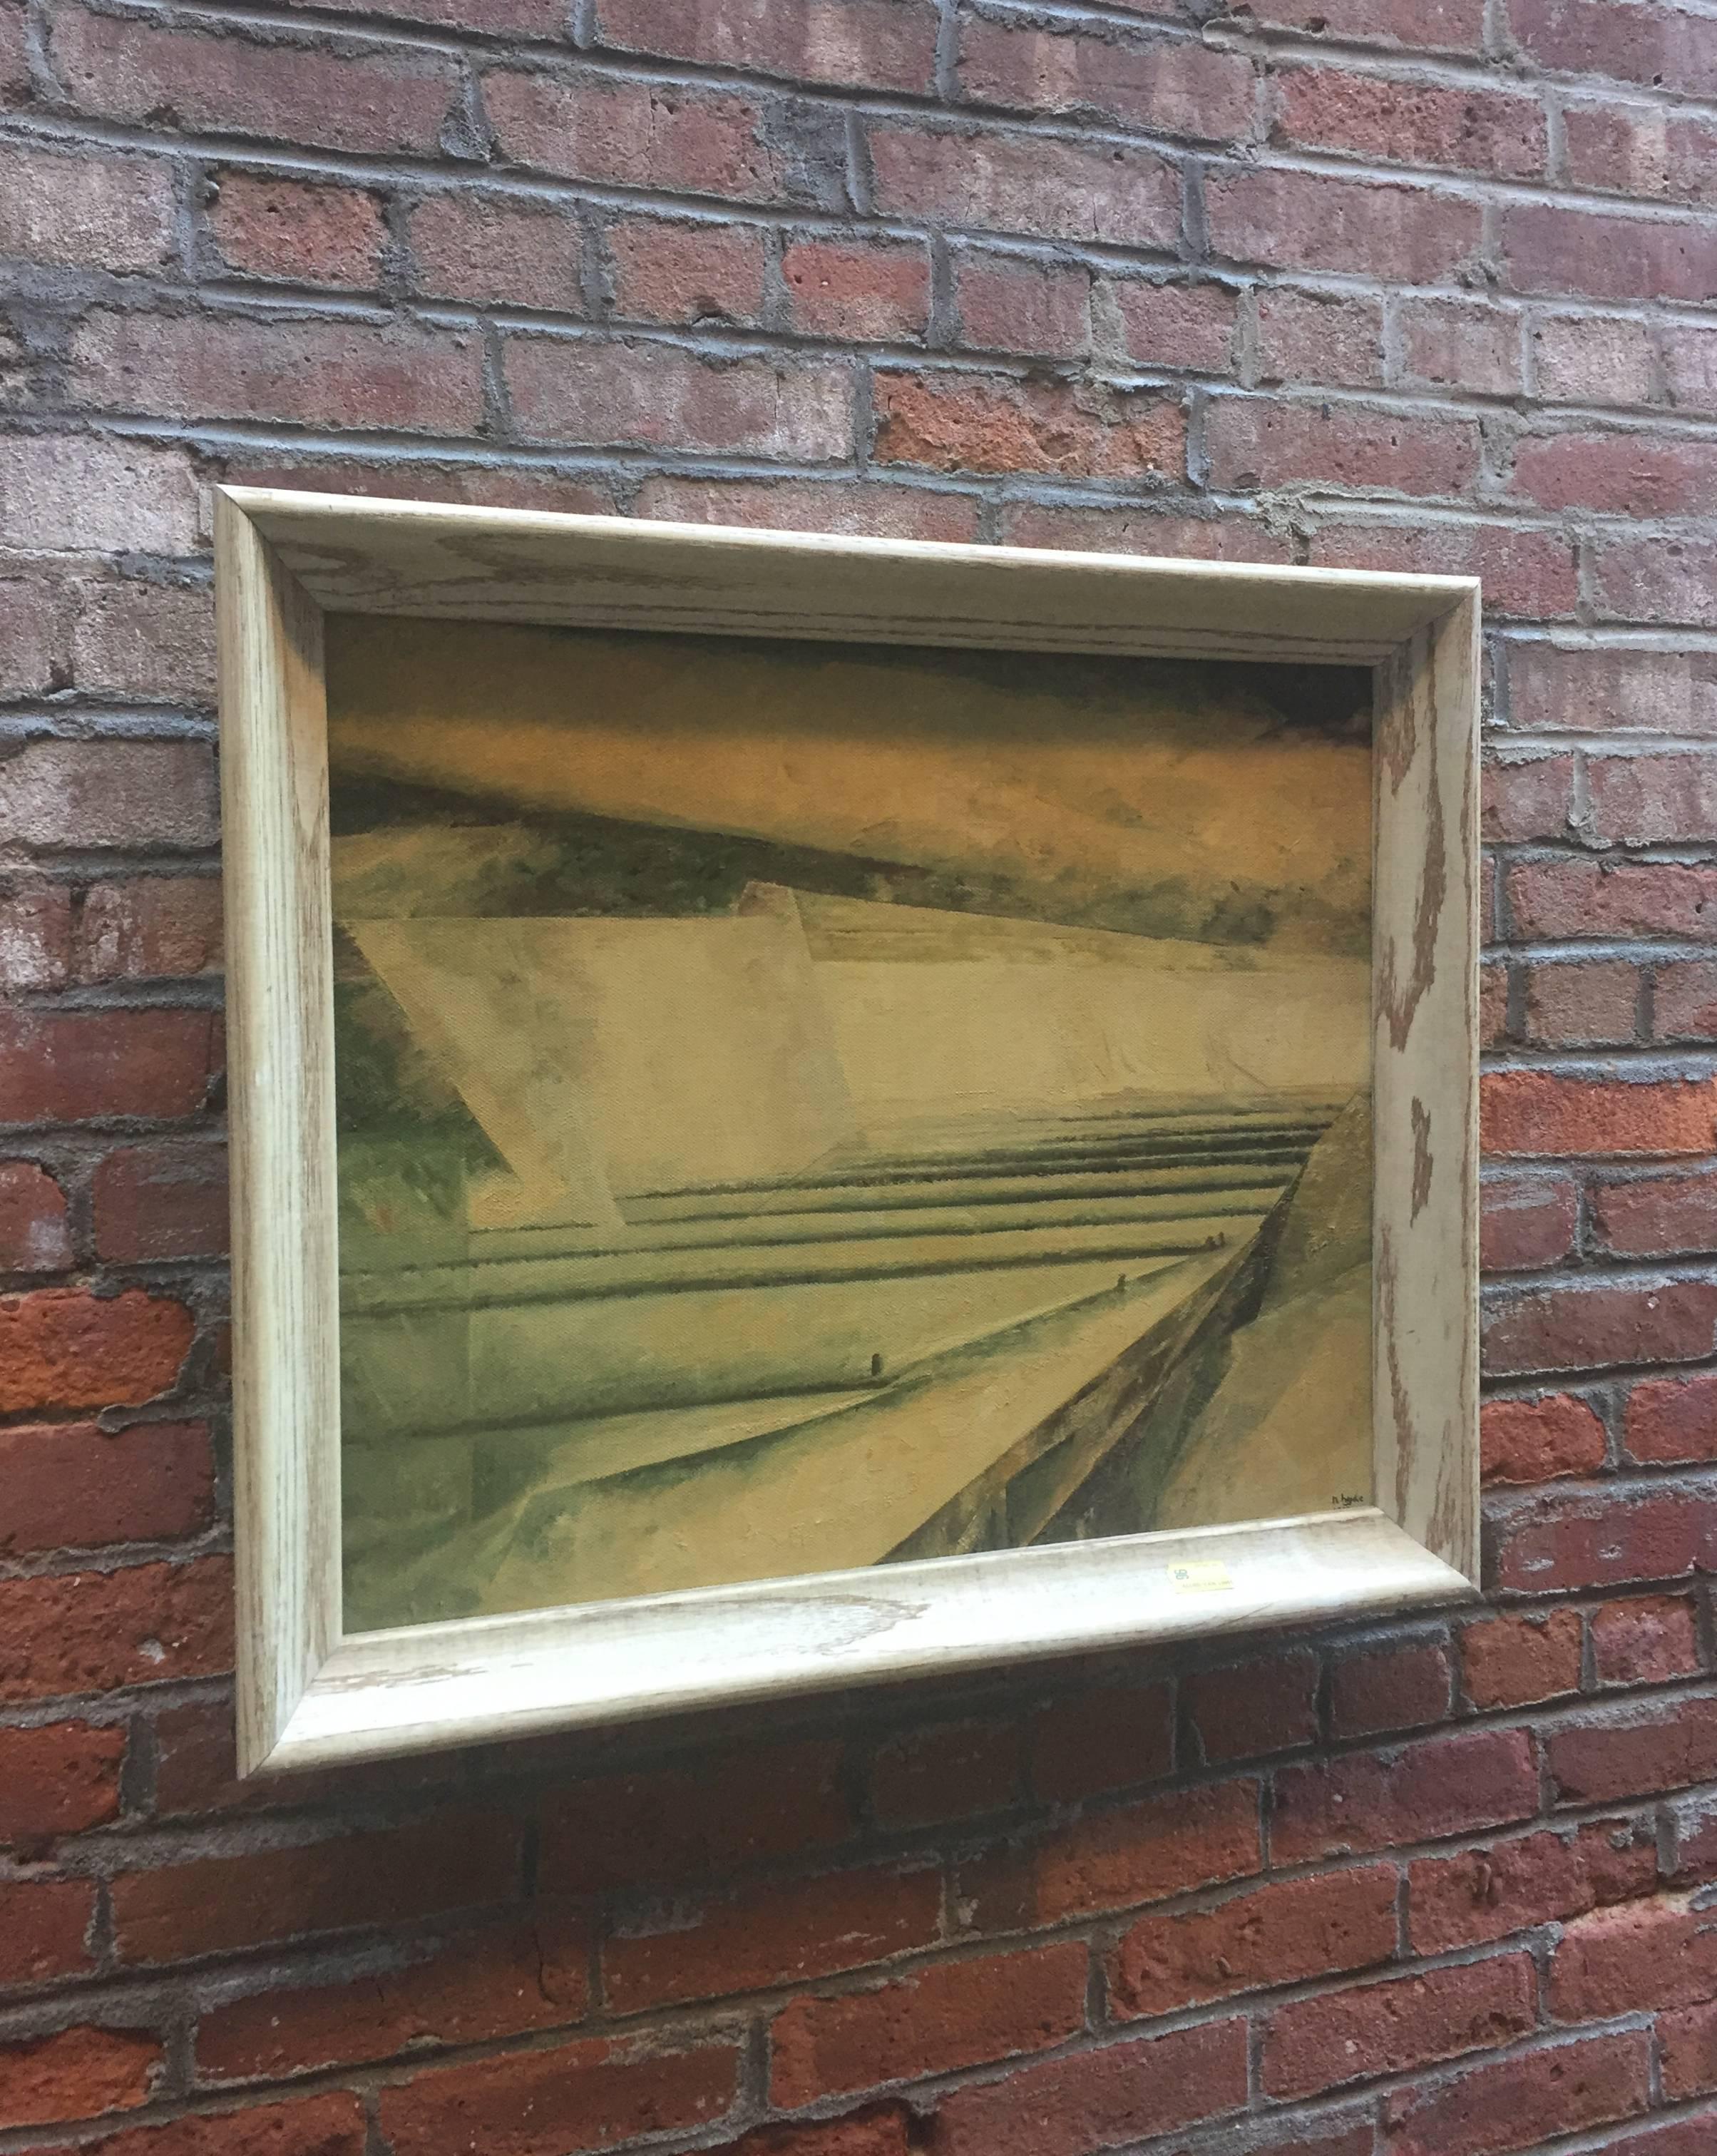 Oil paint on canvas. Signed and dated lower right, N. Hyde, 1957. The artist has shown great depth on a two dimensional surface. The artist has rendered an area in the foreground that looks to be a stepped surface and a great walled area in the